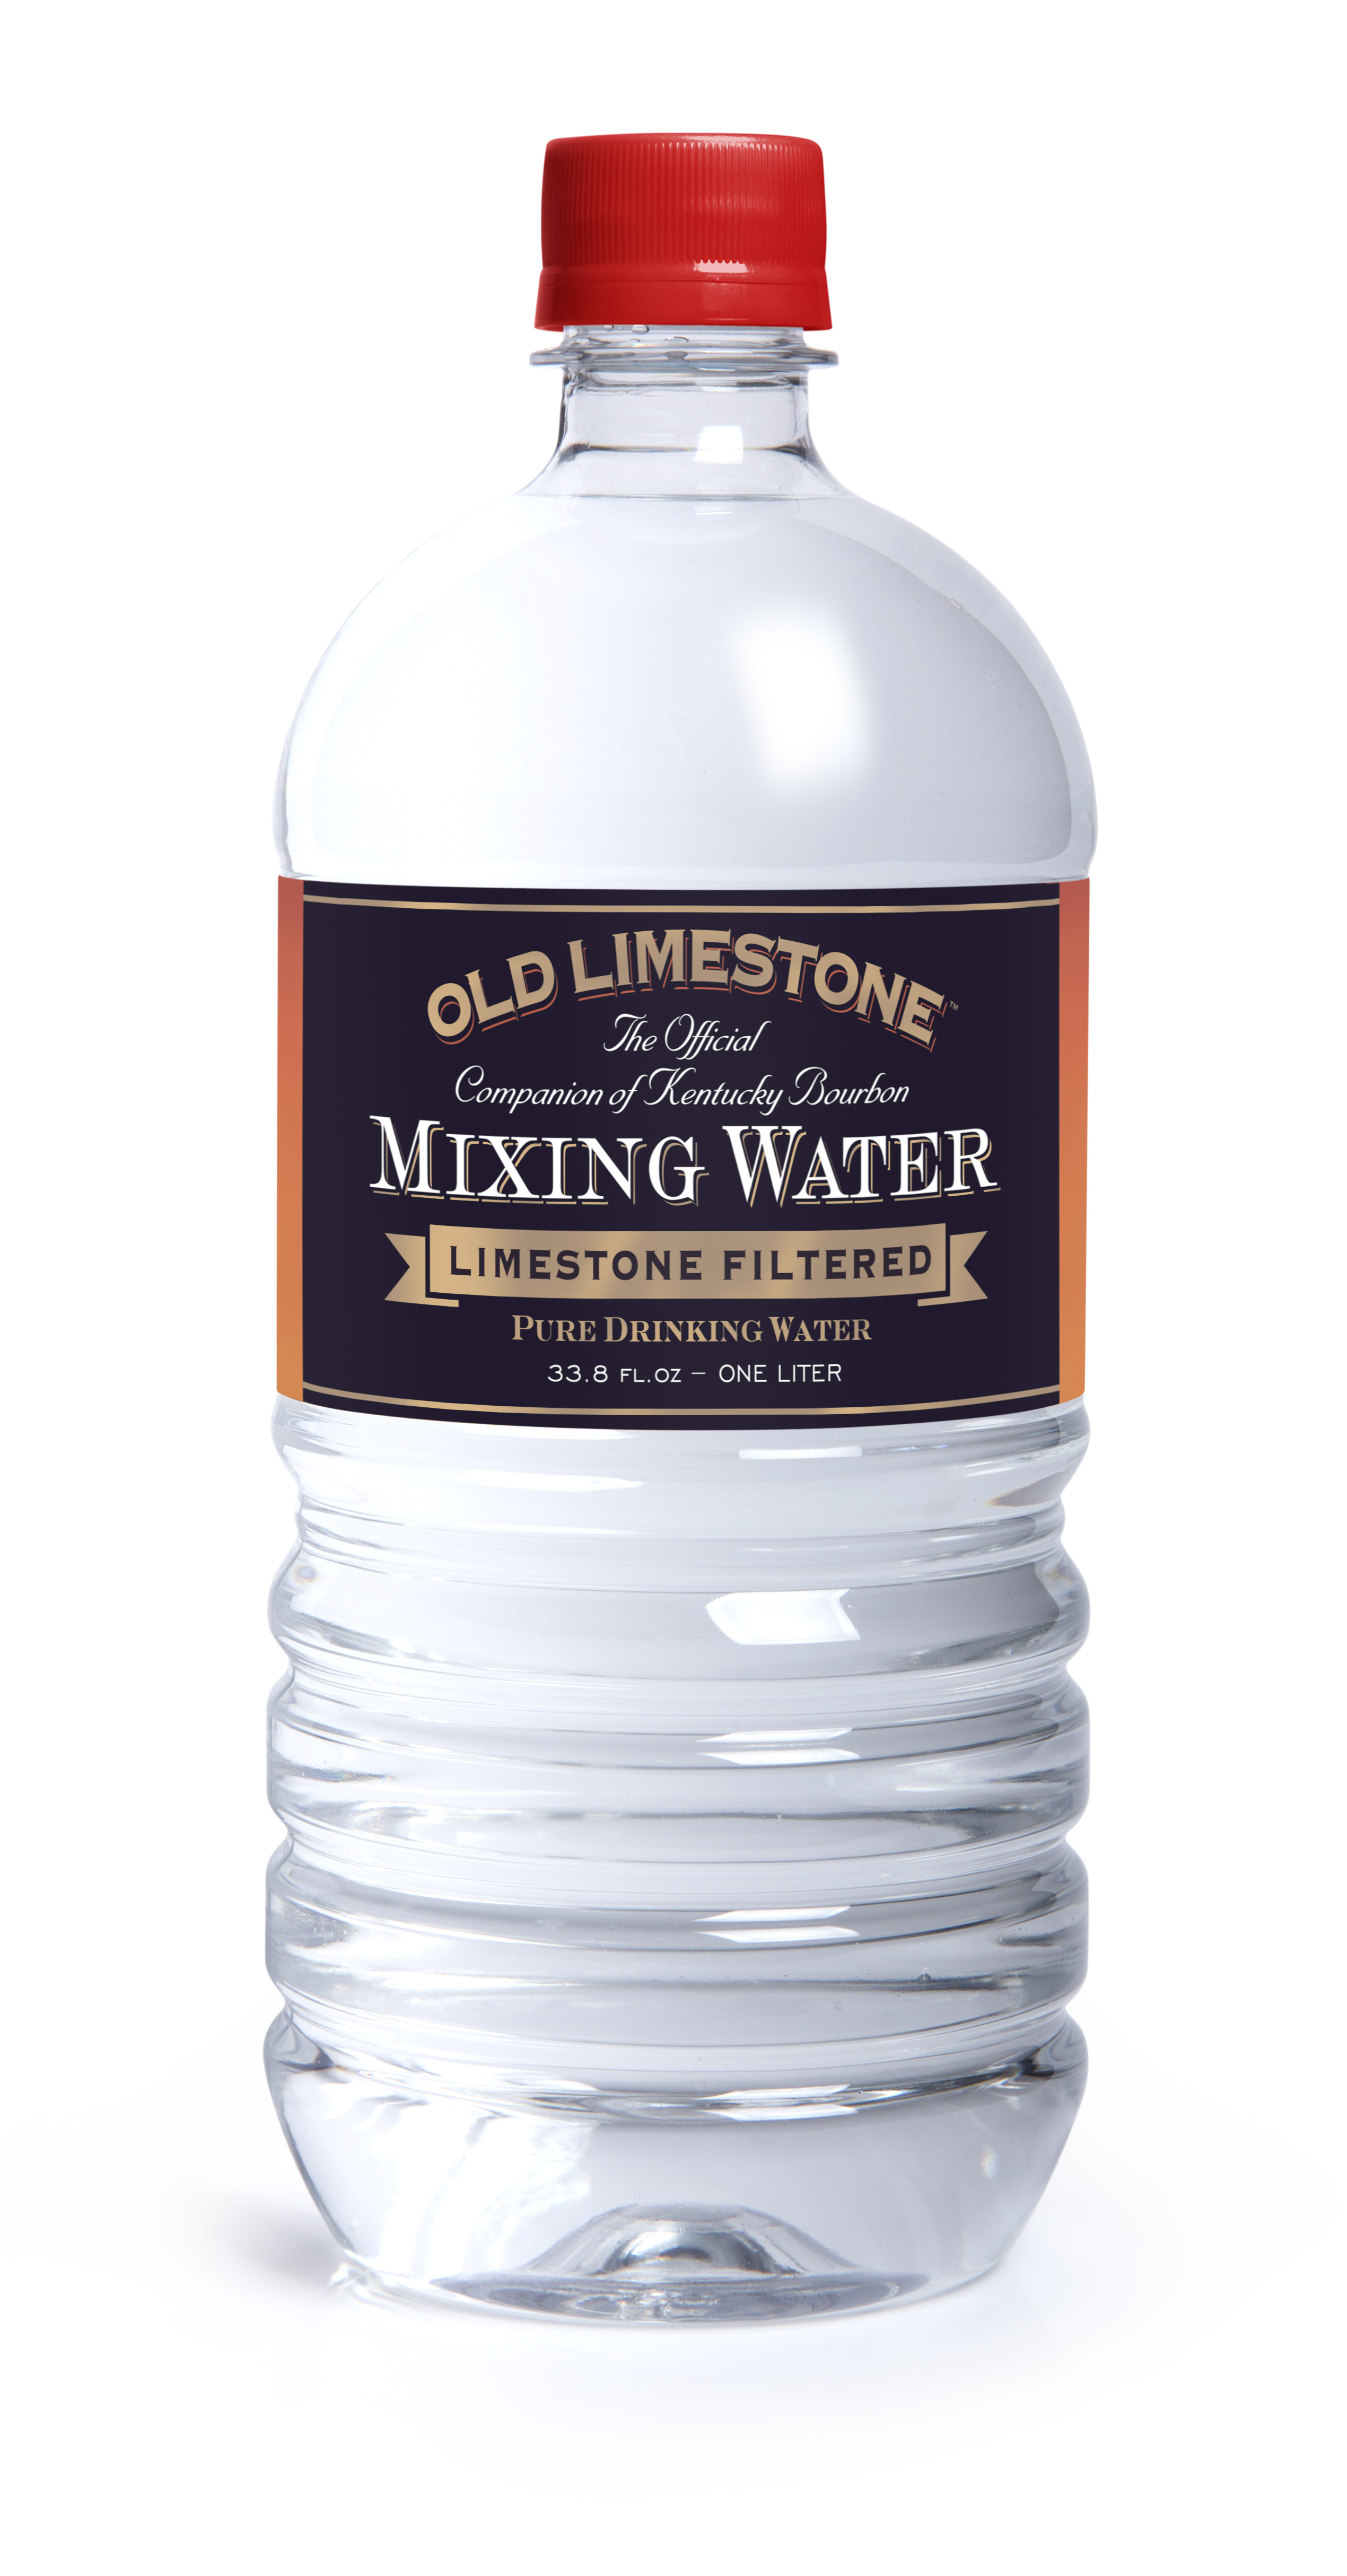 Its was inevitable that we'd add water to the world's passion for bourbon. Old Limestone Mixing Water For  Bourbon. Bottled in Kentucky. 1 liter bottle.